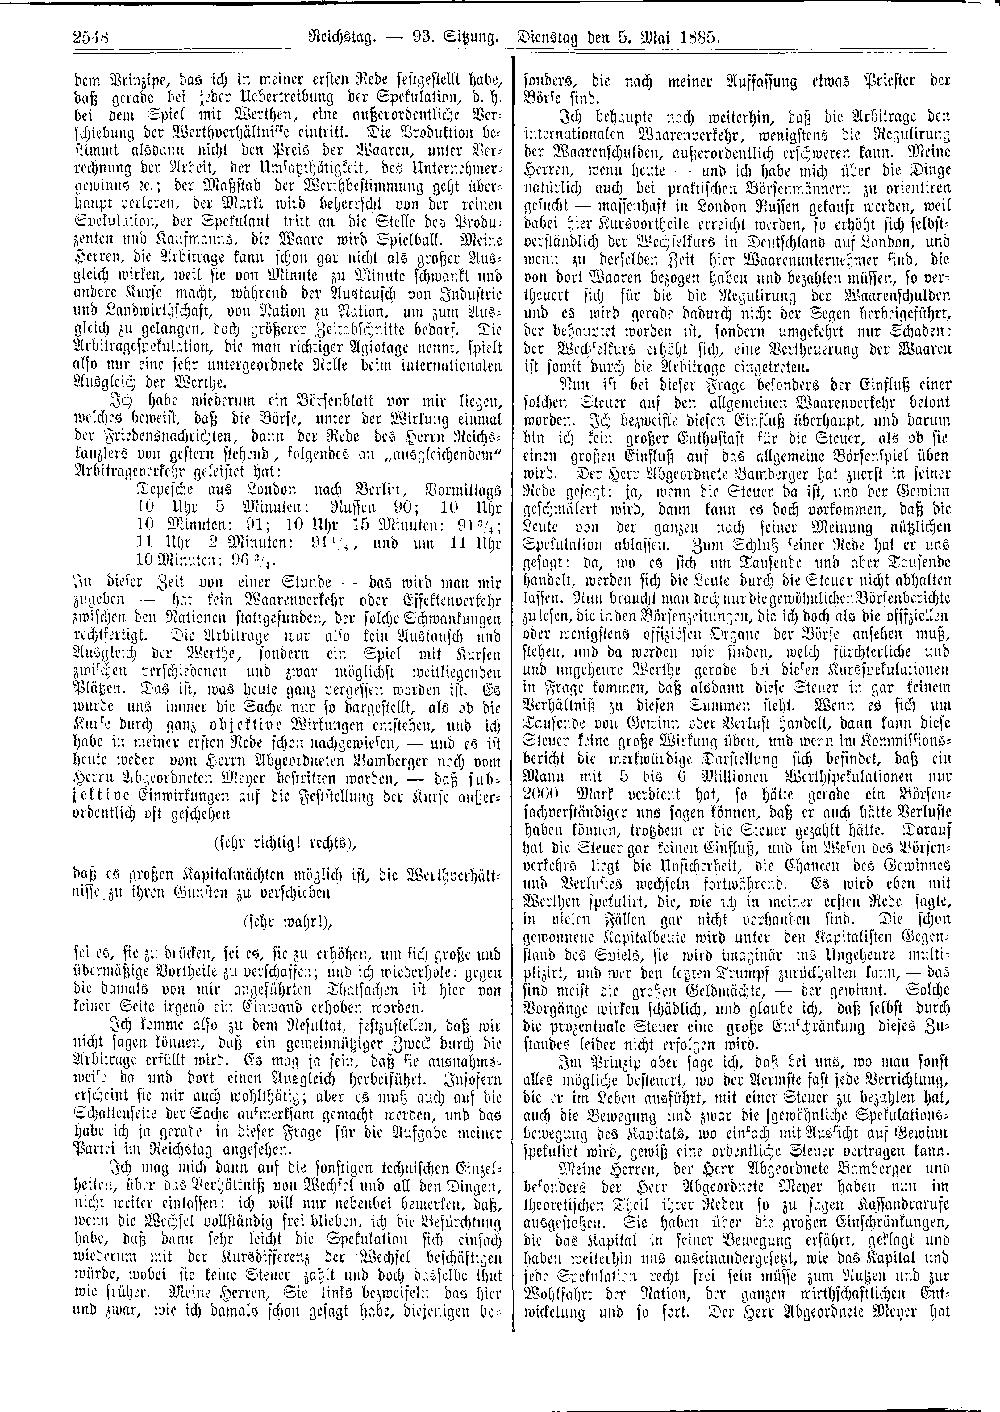 Scan of page 2548